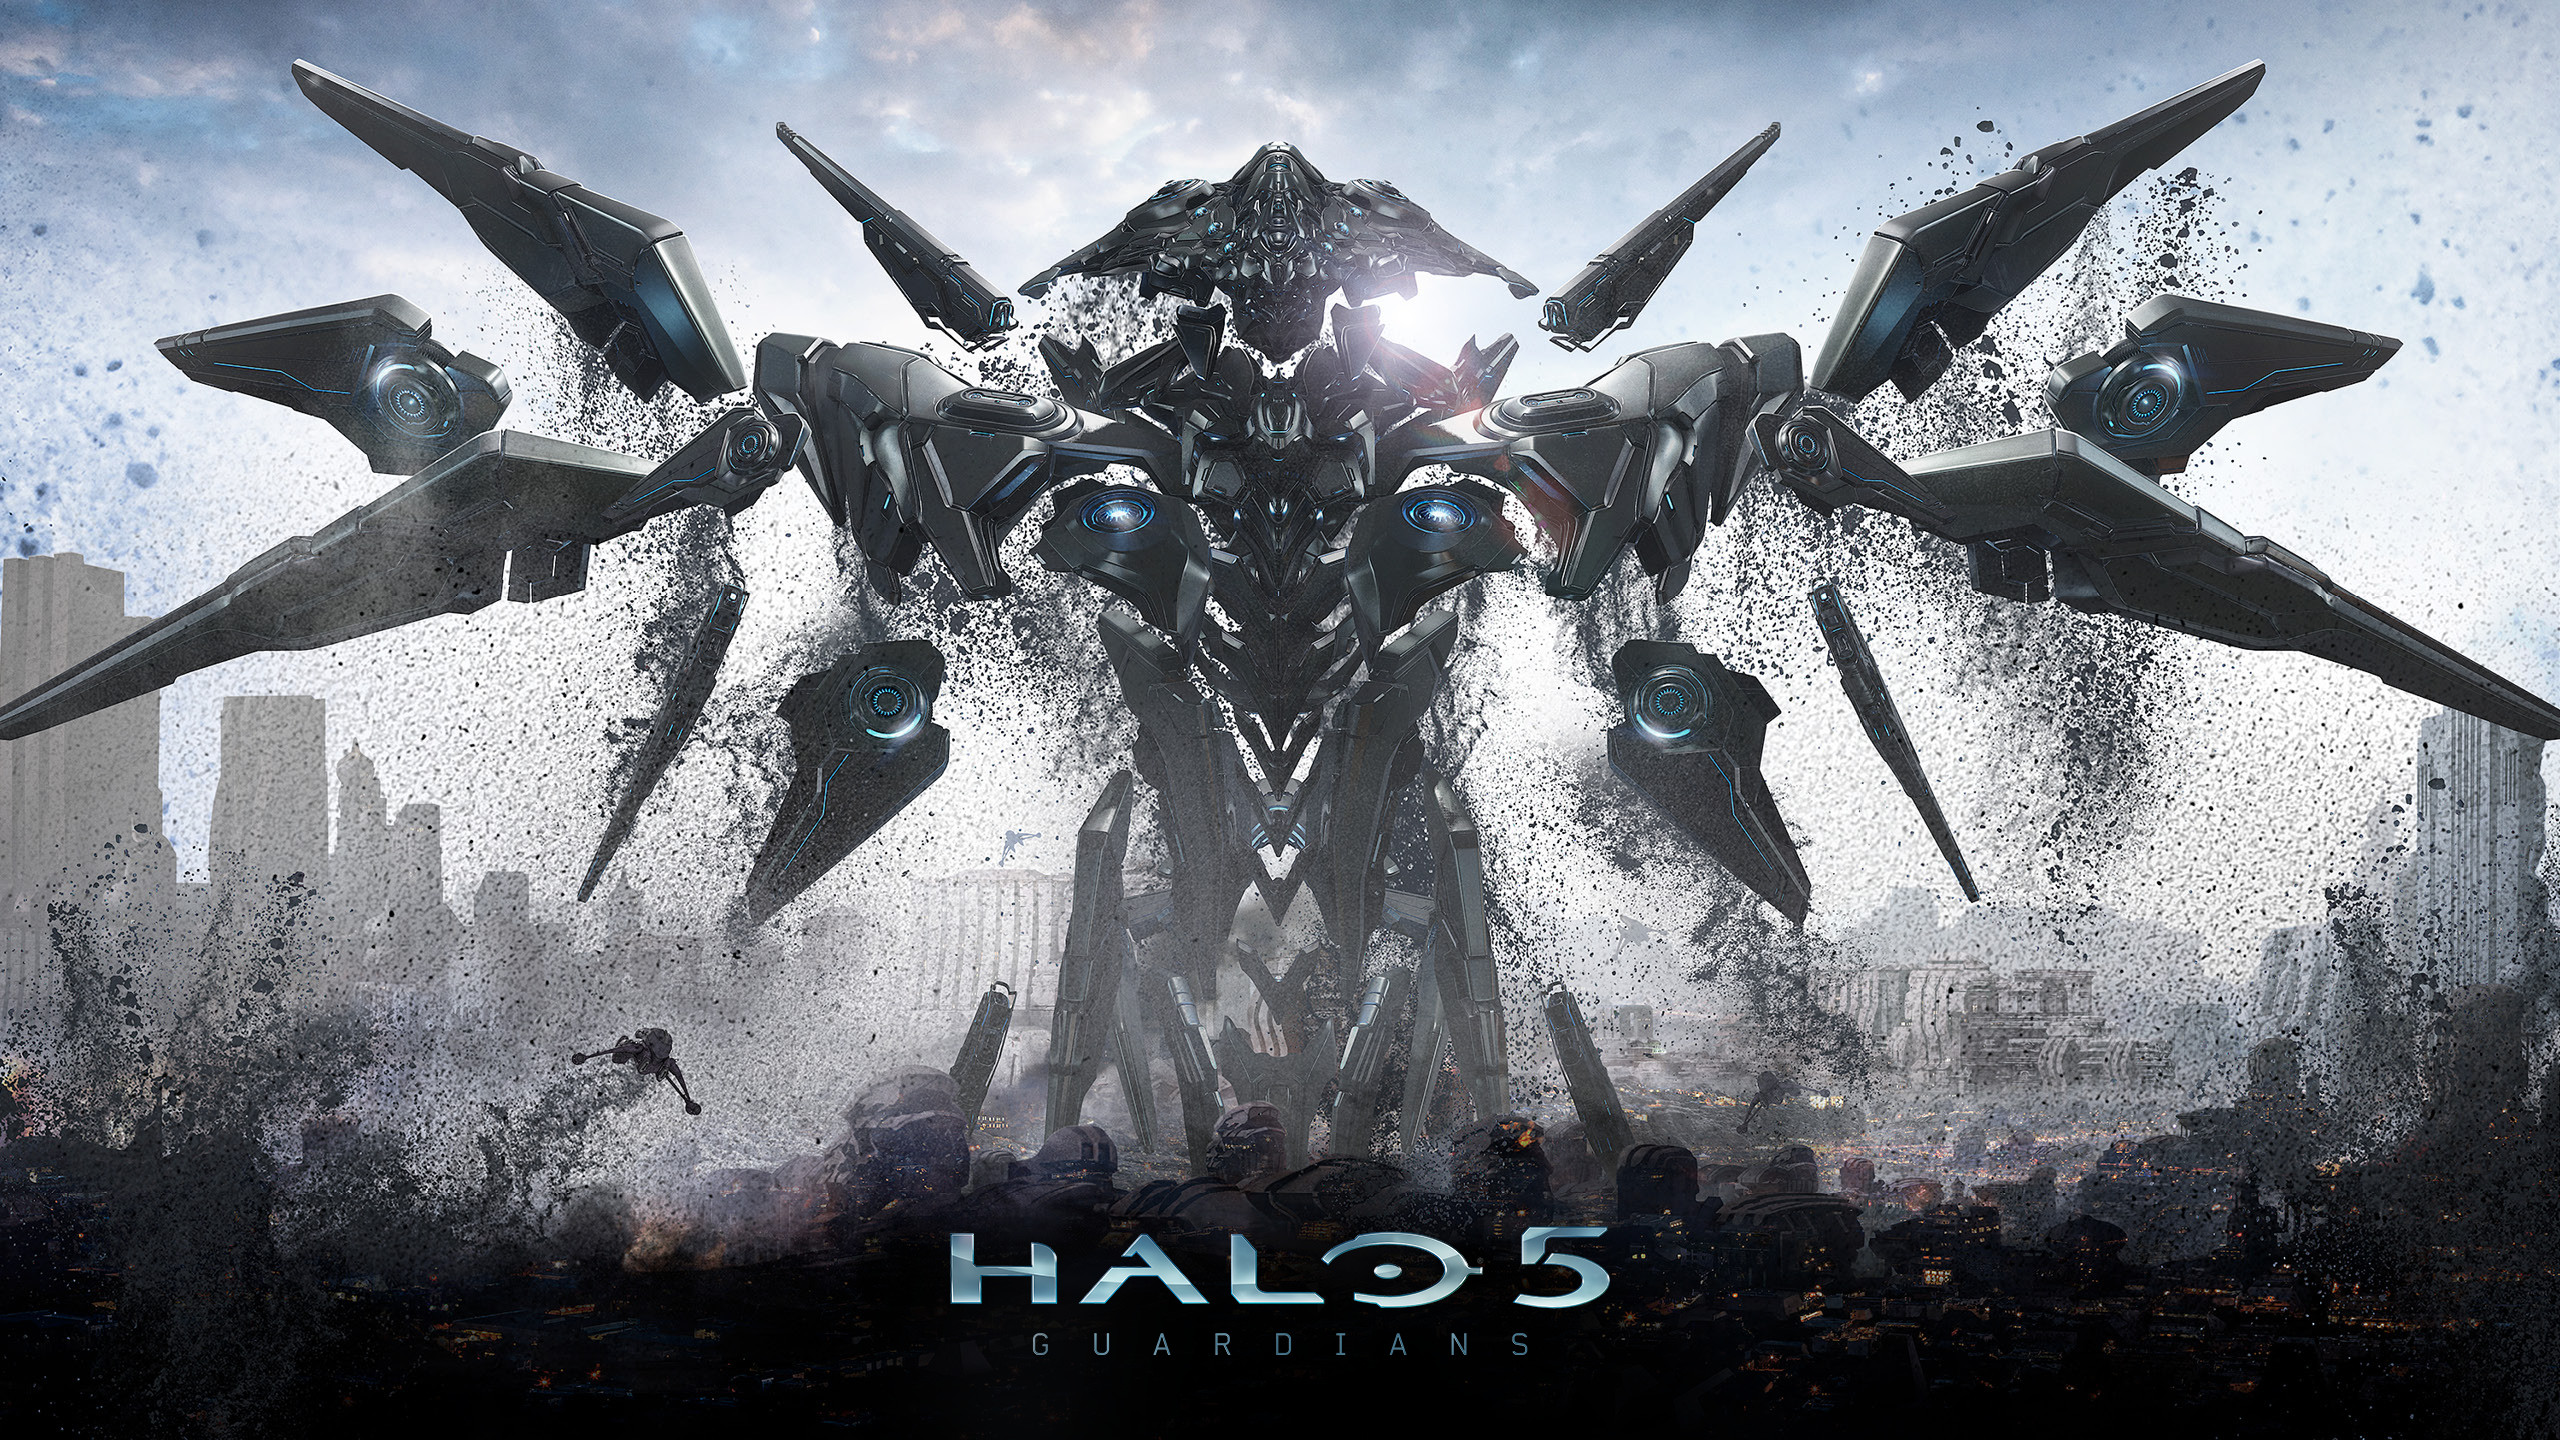 halo 5 guardians wallpaper,poster,transformers,fictional character,illustration,graphic design